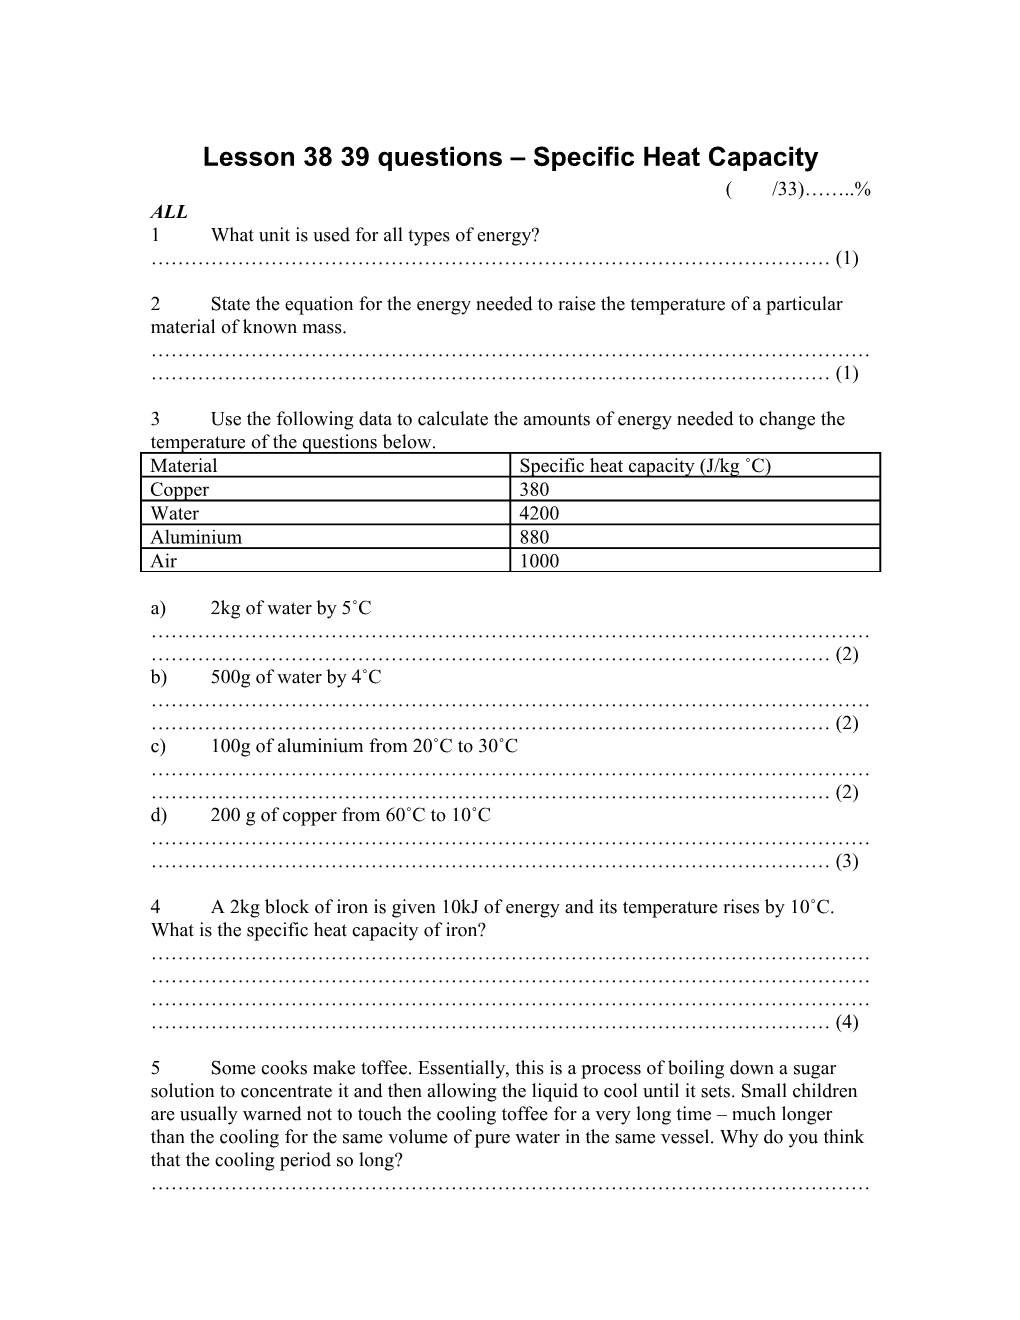 Lesson 38 39 Questions Specific Heat Capacity